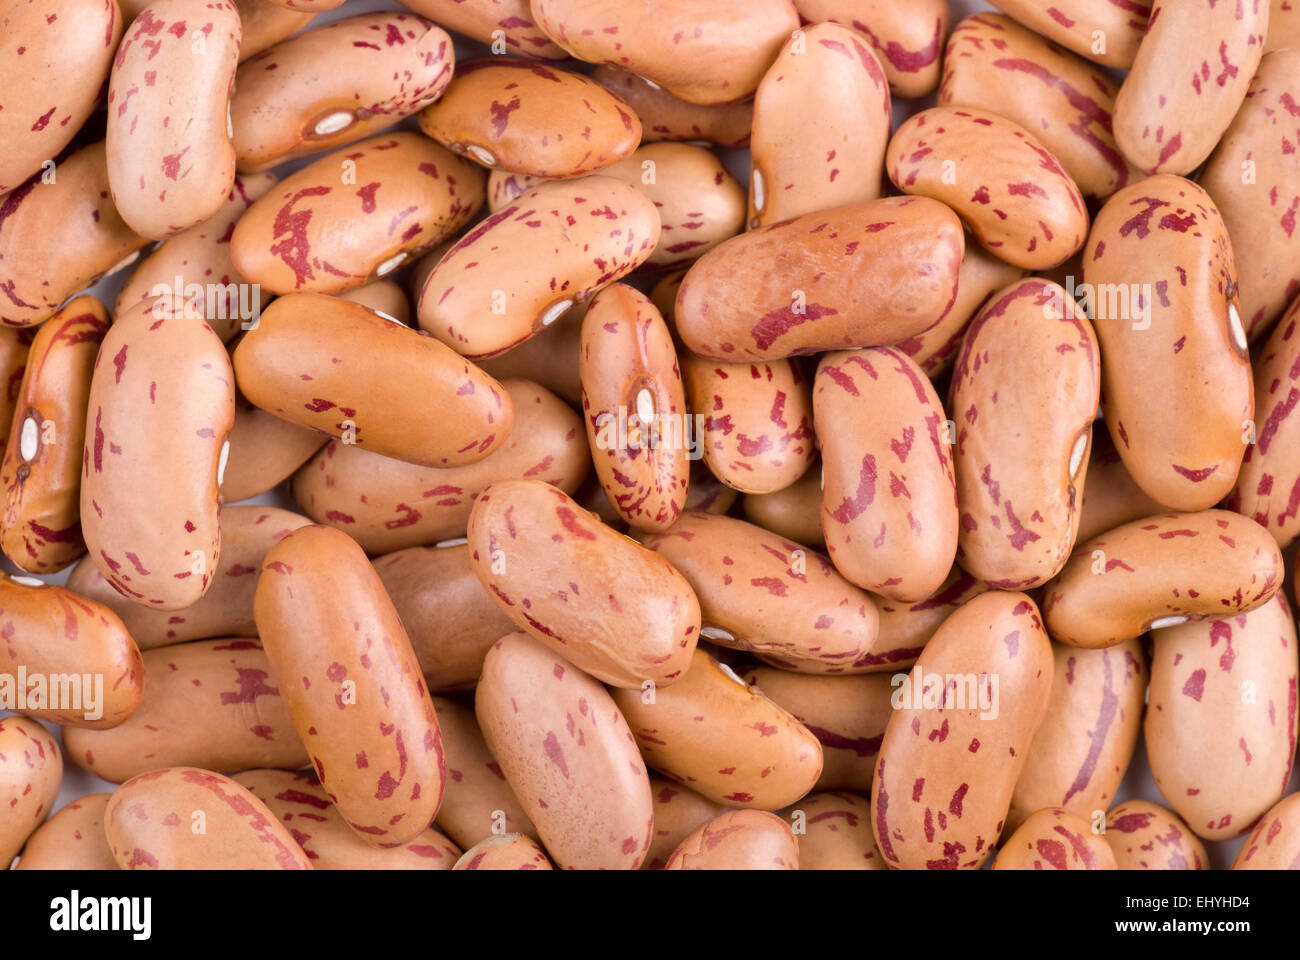 Pinto beans full frame background close up. Stock Photo